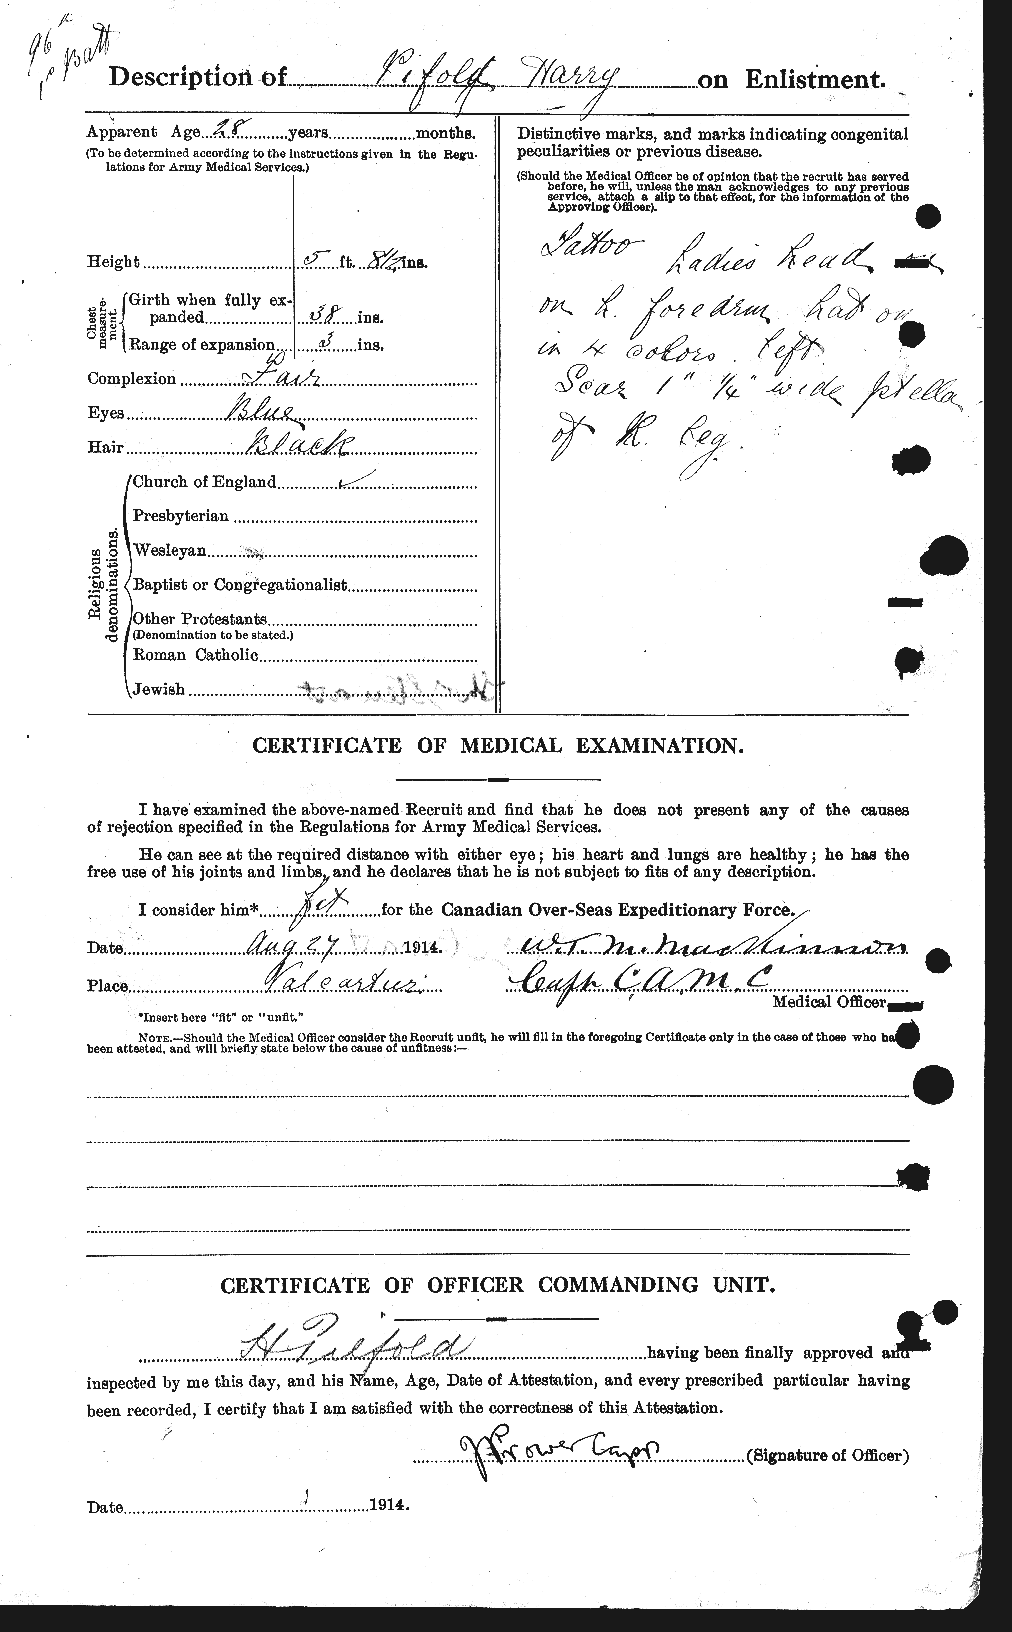 Personnel Records of the First World War - CEF 582280b